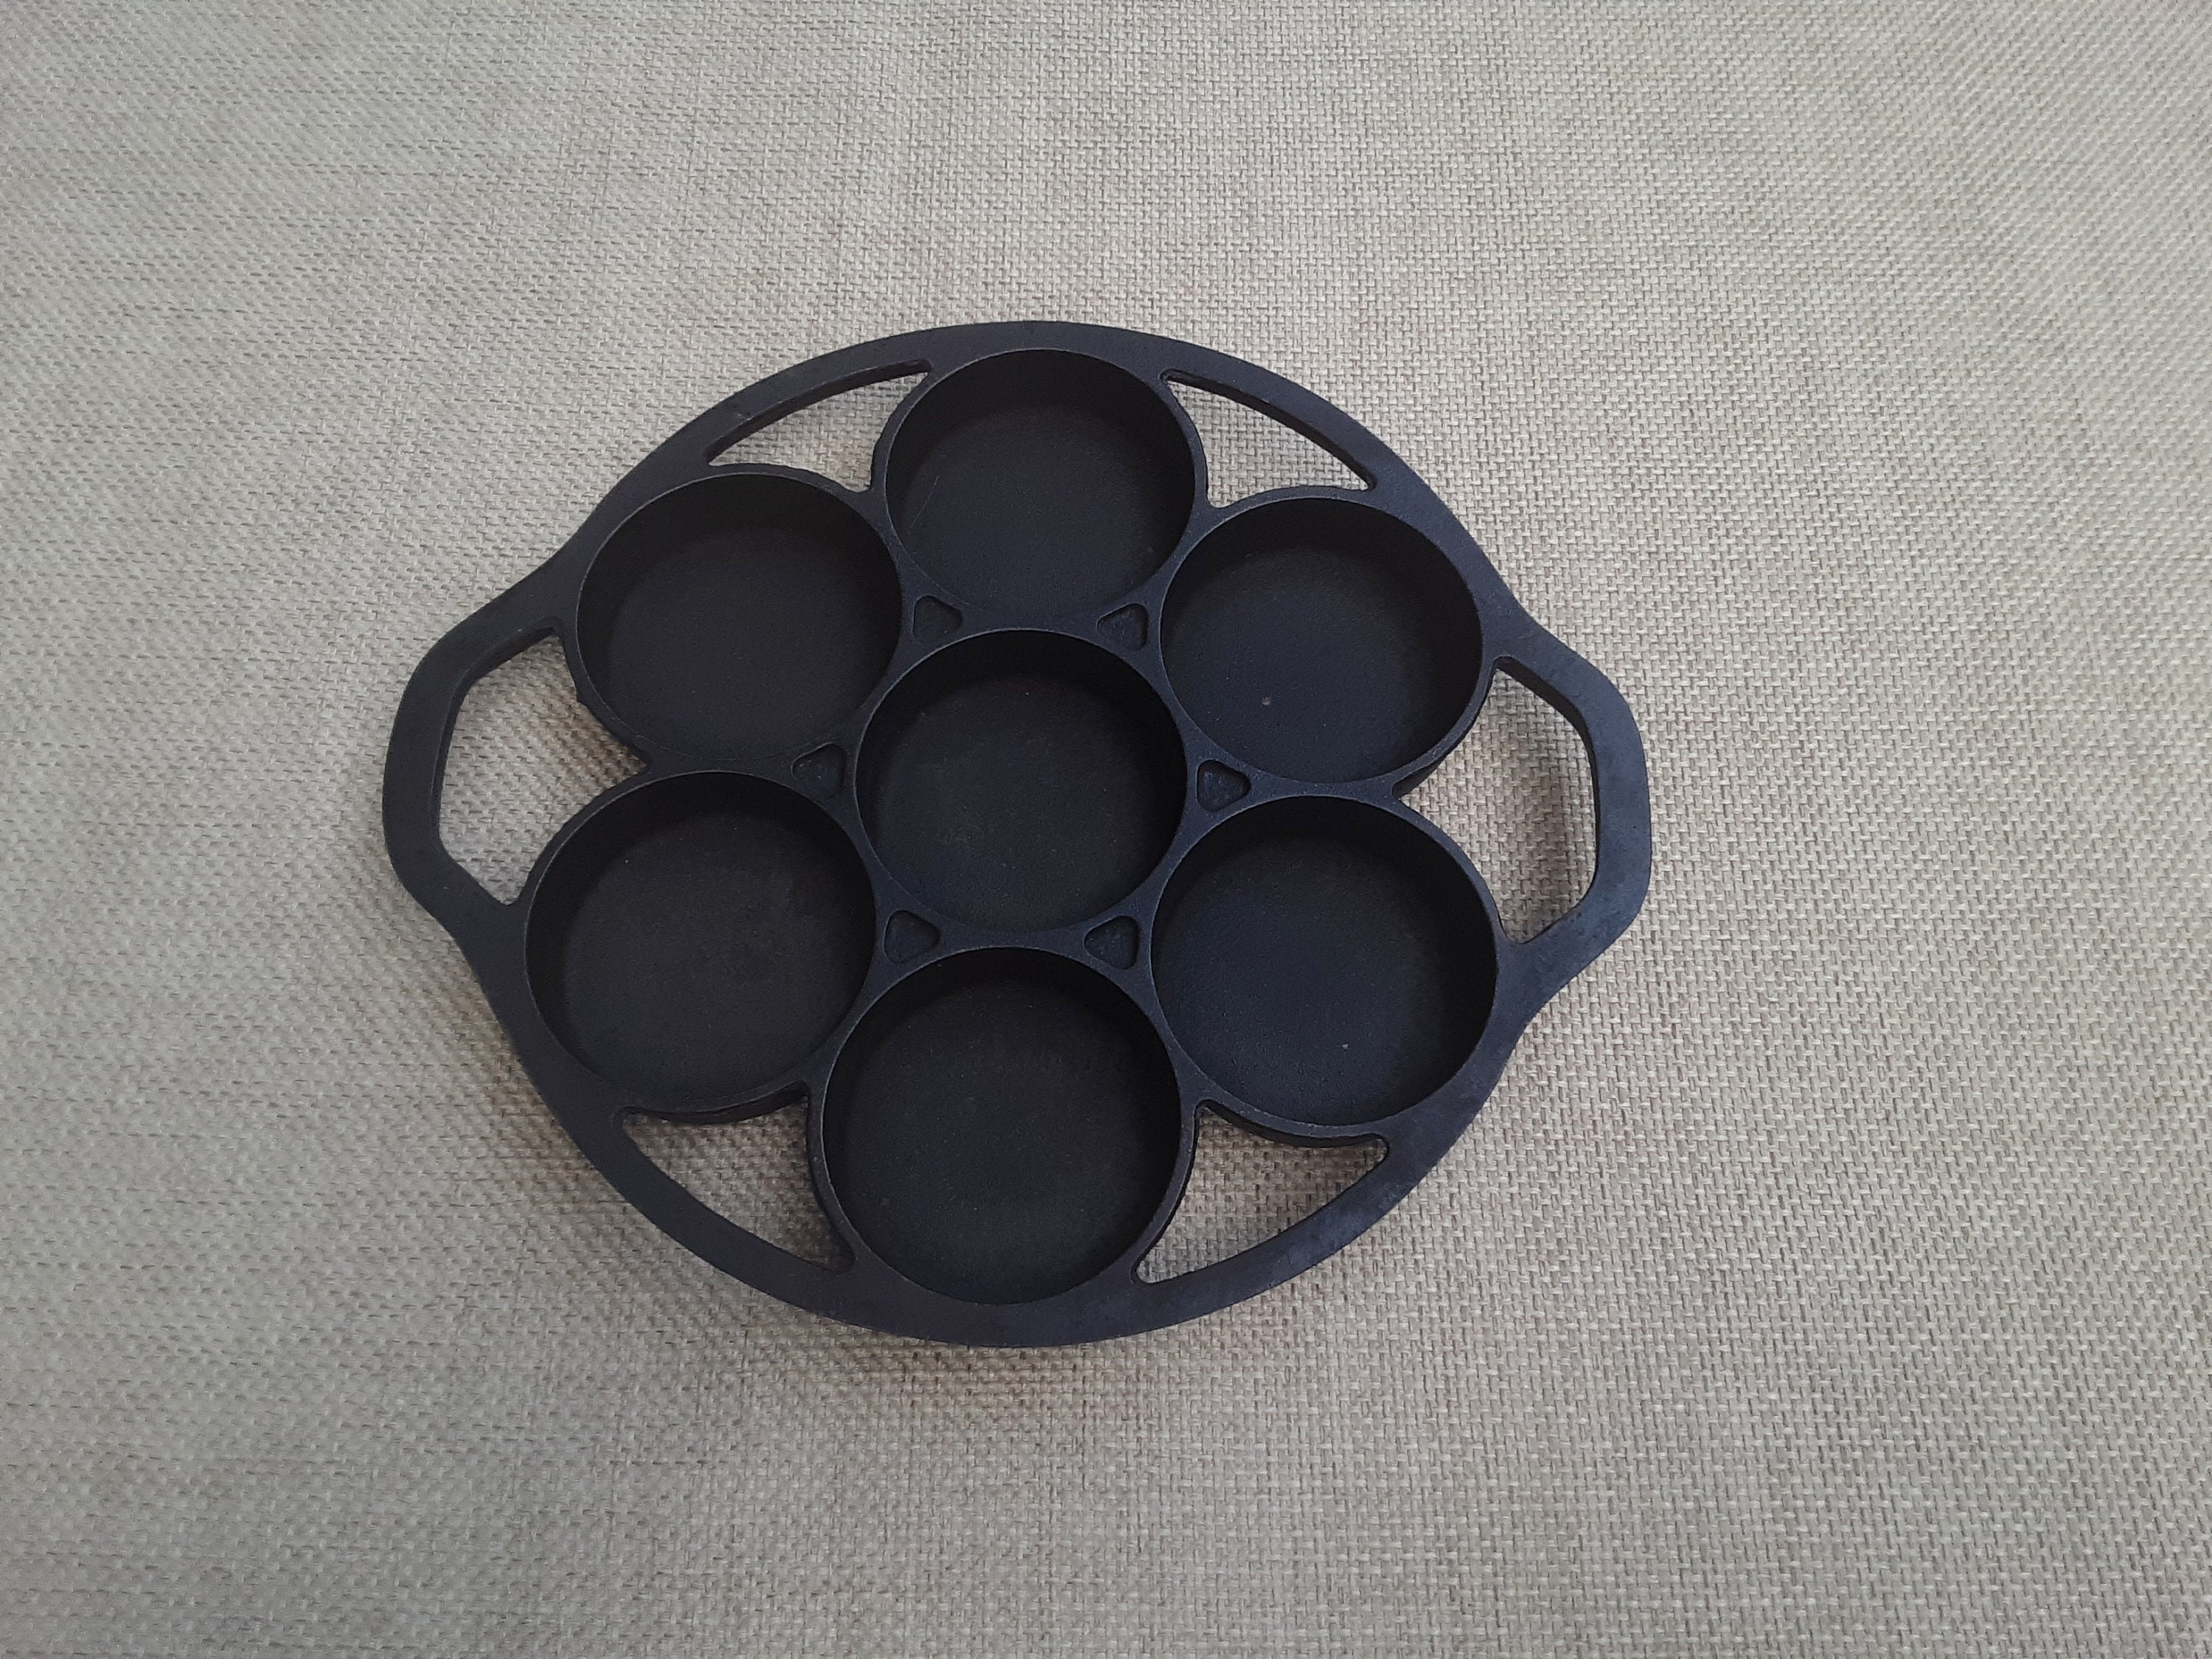 Cast Iron Guys - Unmarked Wagner popover pan/muffin tin 1960s. Made from  Griswold pattens. Great user Item 2114 Please note all pictures on our site  are of the actual piece you will